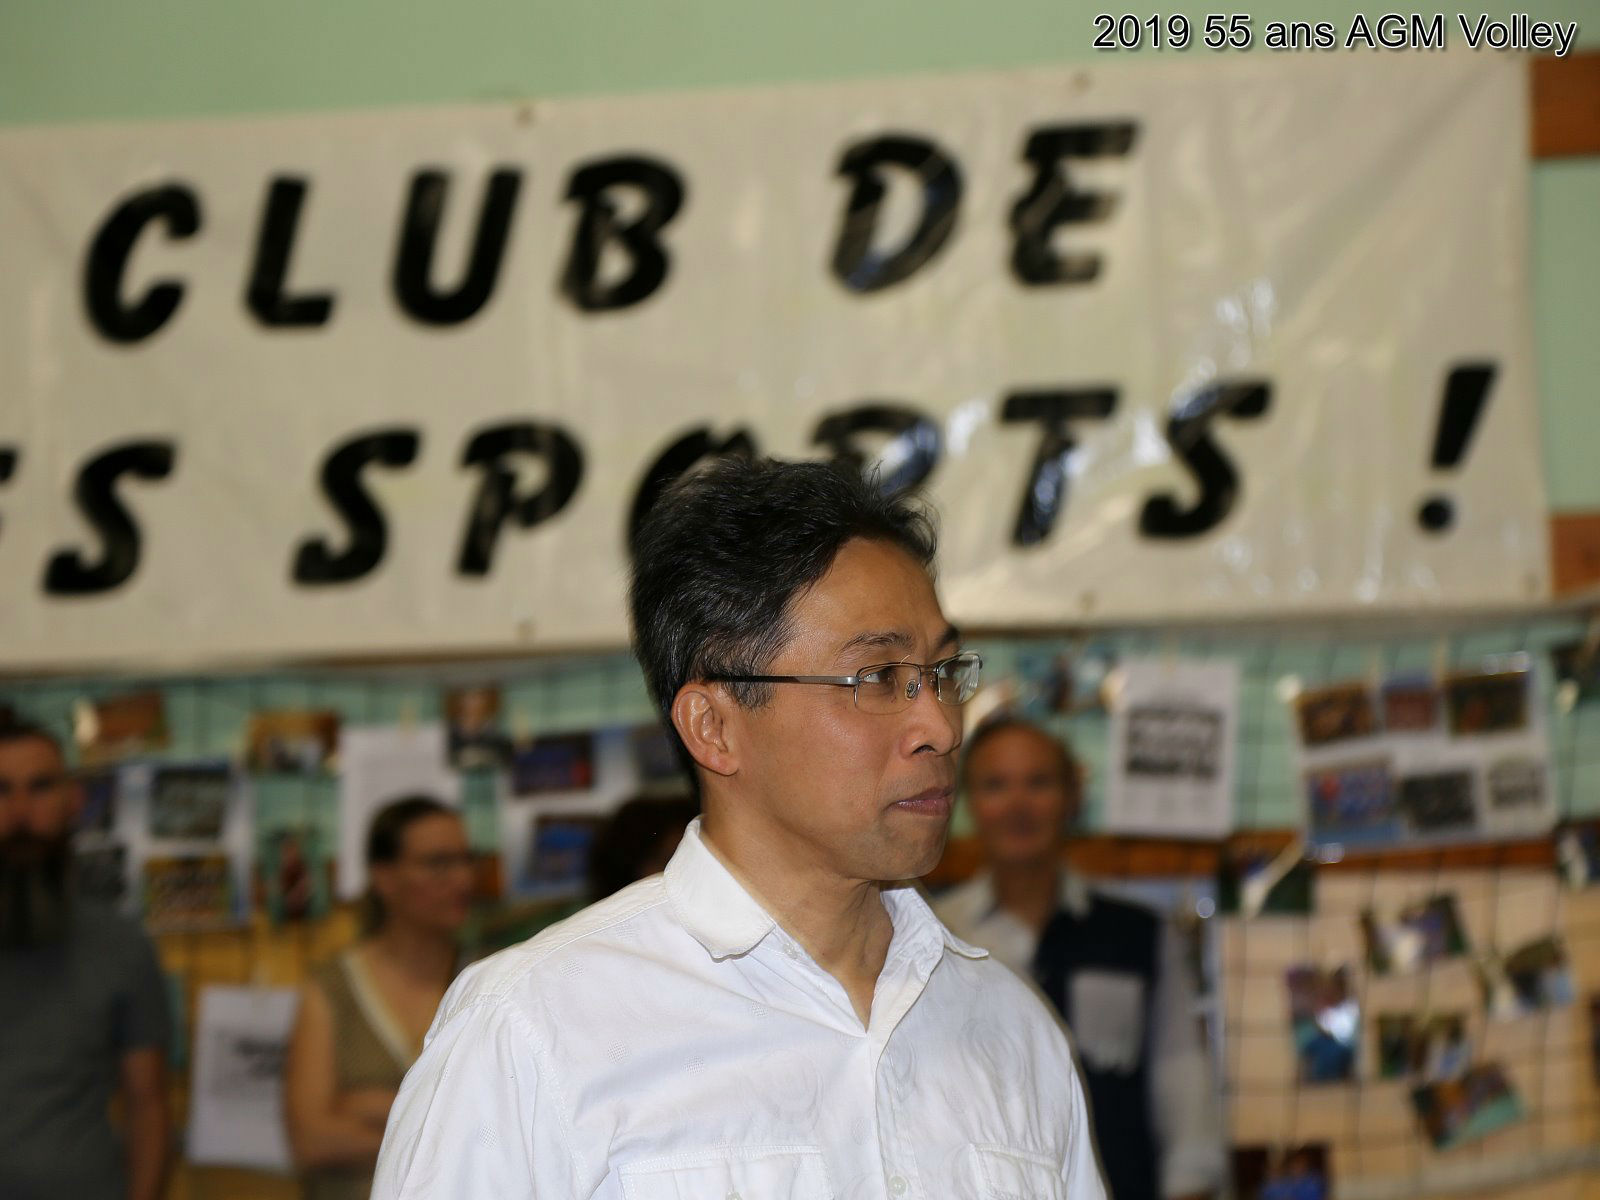 2019_55 ans AGM Volley_017